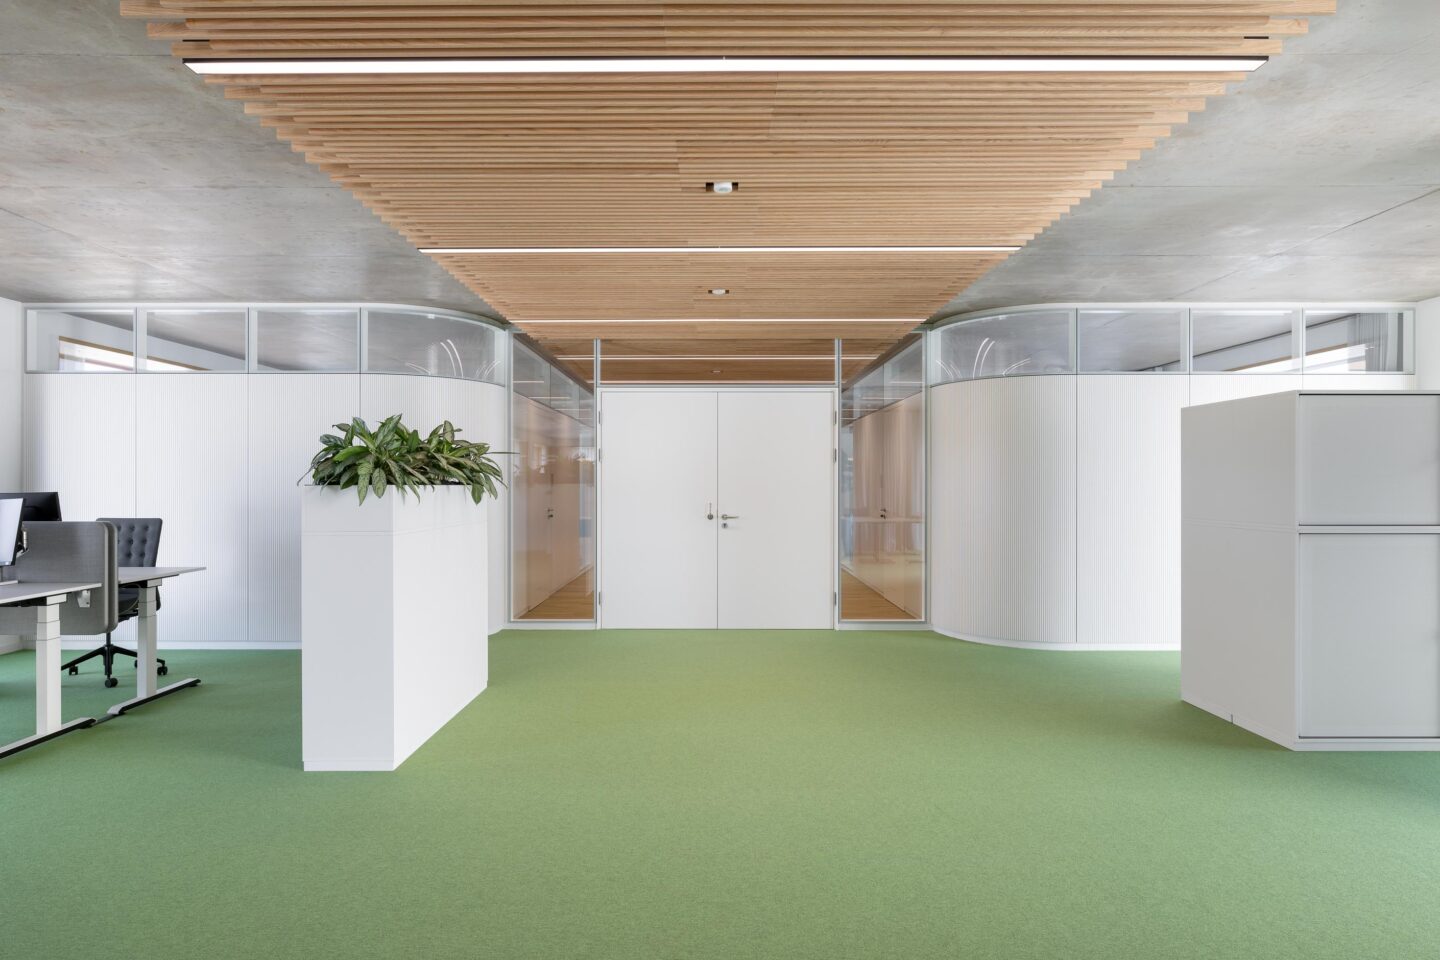 Sparkasse Markgräflerland | open office space with rooms at both sides